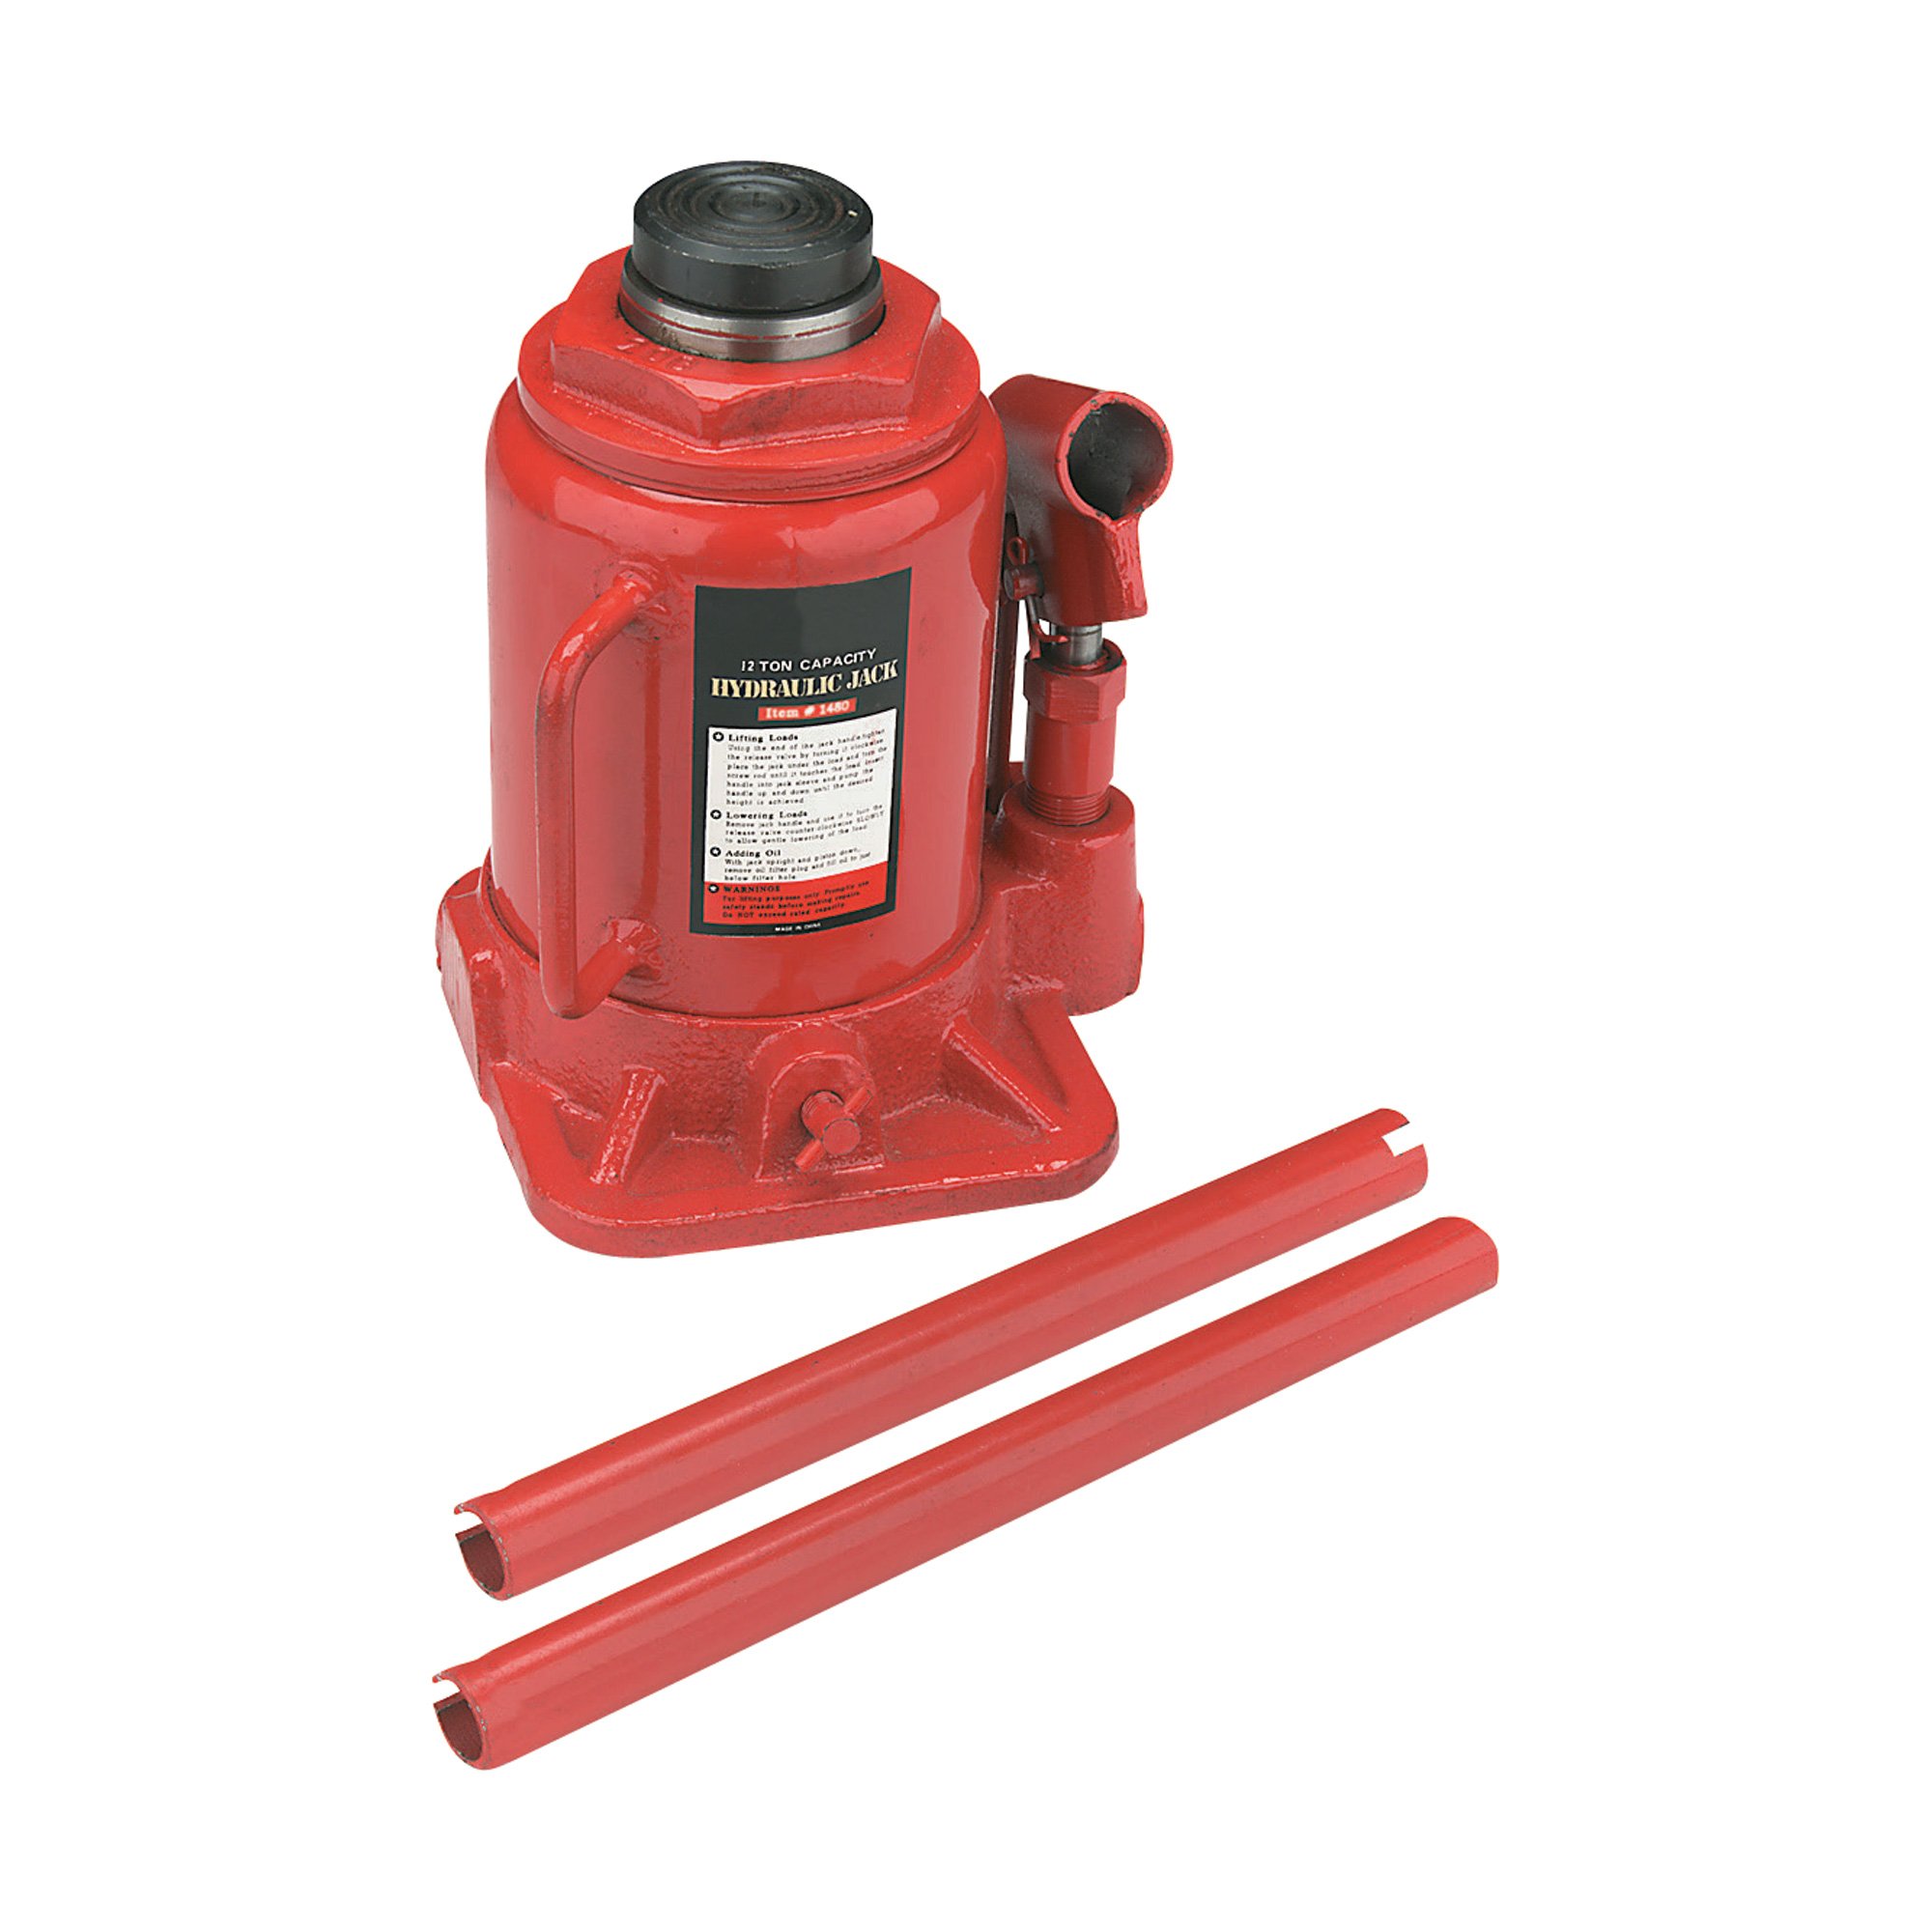 Northern Industrial Tools Adjustable Stubby Hydraulic Bottle Jack Lifts 12  Tons Northern Tool